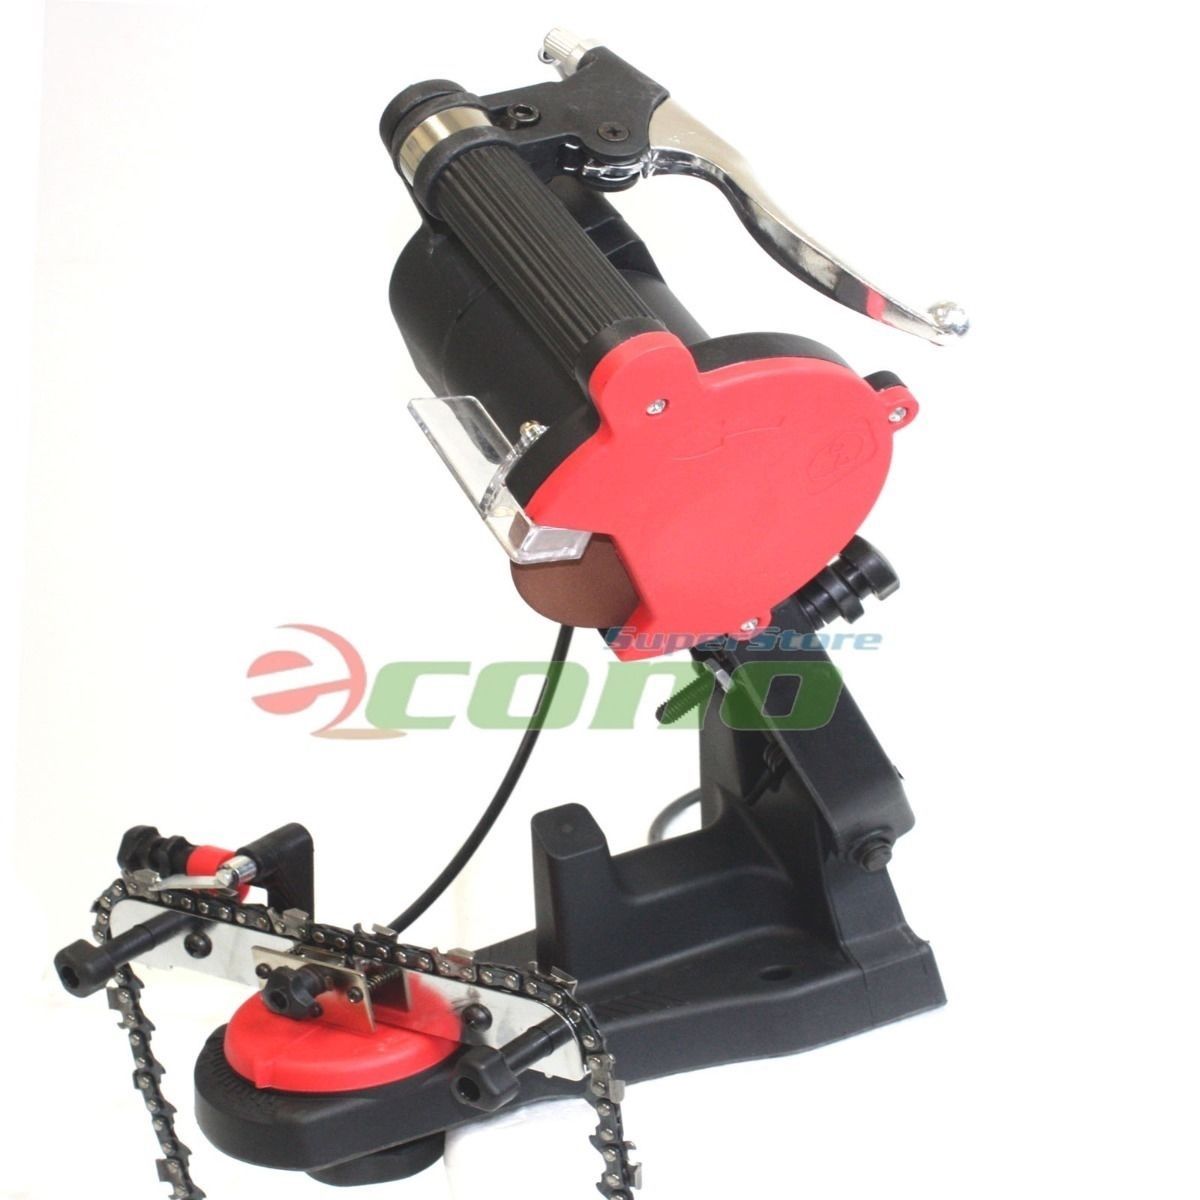 Electric Chain Saw Sharpener Grinder Bench Wall Vise Mount Chainsaw 4200 RPM 